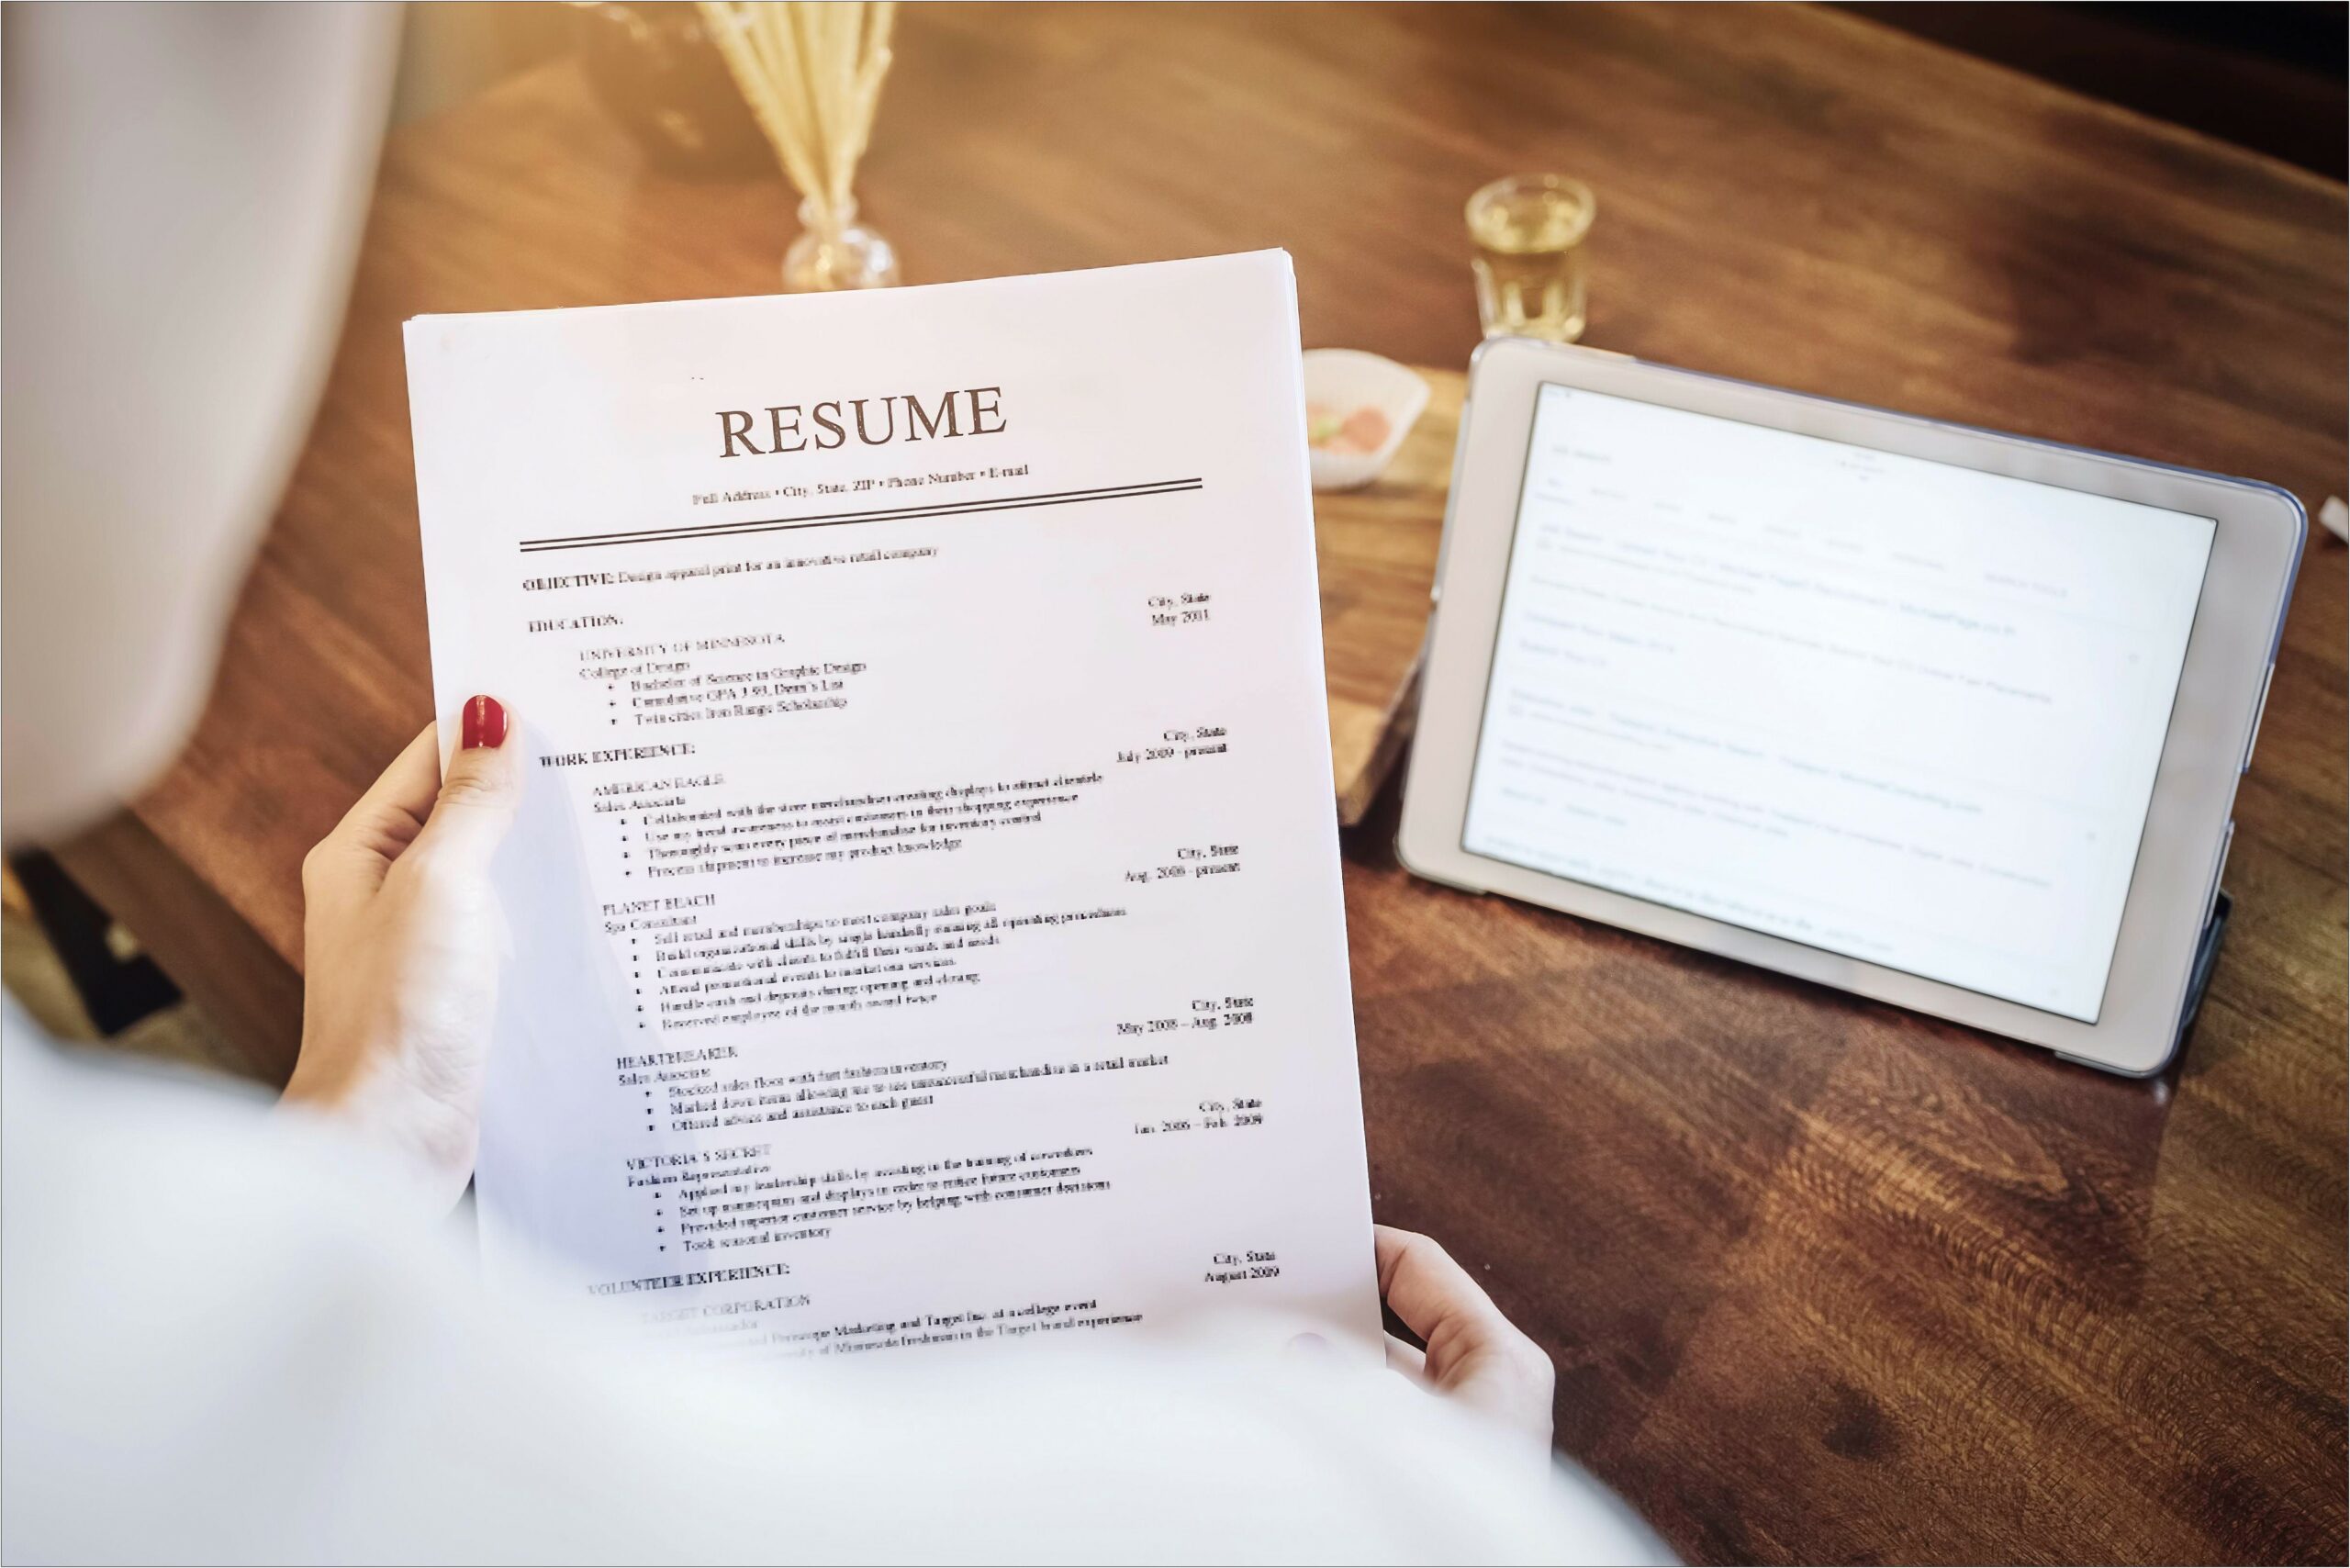 Important Information To Put In A Resume